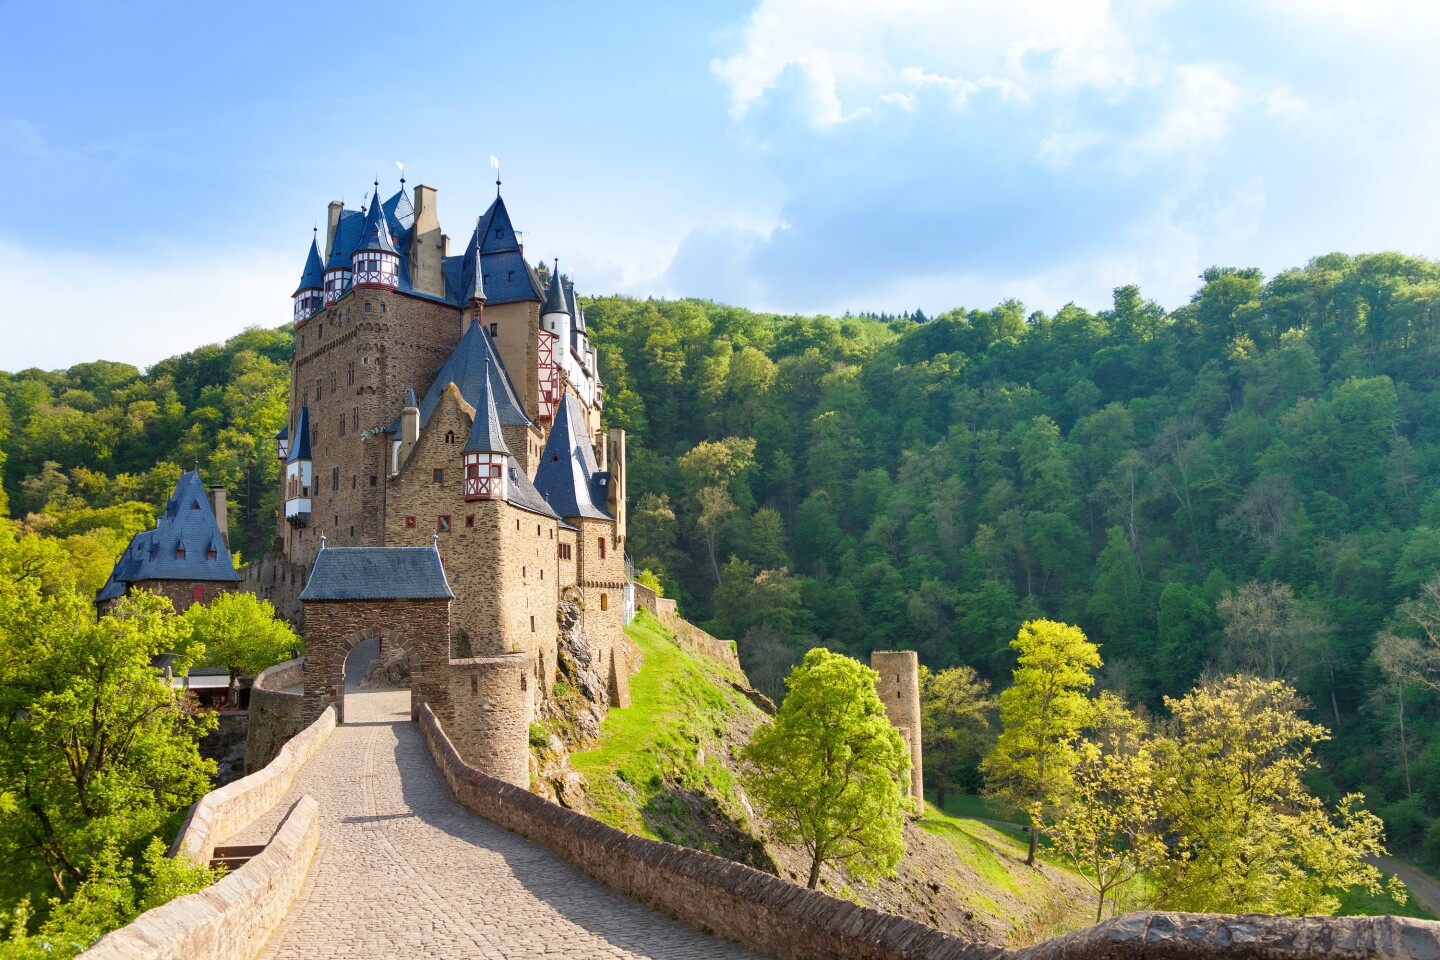 <h2>6. Burg Eltz (Eltz Castle)</h2> <p><i>Wierschem, Germany</i></p> <p> Owned by the same family since it was built nearly 900 years ago, the beautifully preserved Burg Eltz—with eight soaring turreted towers, oriel windows, gables, and half-timber frames—looks straight out of a fairy tale. It juts out from a 230-foot-tall rock, surrounded by forest, deep in an isolated side valley of the Moselle River. A required 40-minute guided tour, in English, leads you through period rooms decorated with original 15th-century murals, tapestries, and furnishings, and vaulted halls lined with medieval armor and weaponry. The treasury, filled with gold and silver historical artifacts, can be visited independently.<br> </p> <h3>How to visit Burg Eltz</h3> <p><a class="Link" href="https://burg-eltz.de/en/homepage" rel="noopener">Burg Eltz</a> is open from April to November. A seasonal Burgenbus (castle bus) departs from several area train stations on weekends and holidays; the closest is Hatzenport, about a 20-minute ride. Hatzenport is less than 90 minutes by train from Cologne (with a change of trains in Koblenz). There are also multiple hikes to the castle from nearby towns; the most popular is from Moselkern (under 2.5 hours by train from Cologne), a moderately challenging 45-minute climb. </p>